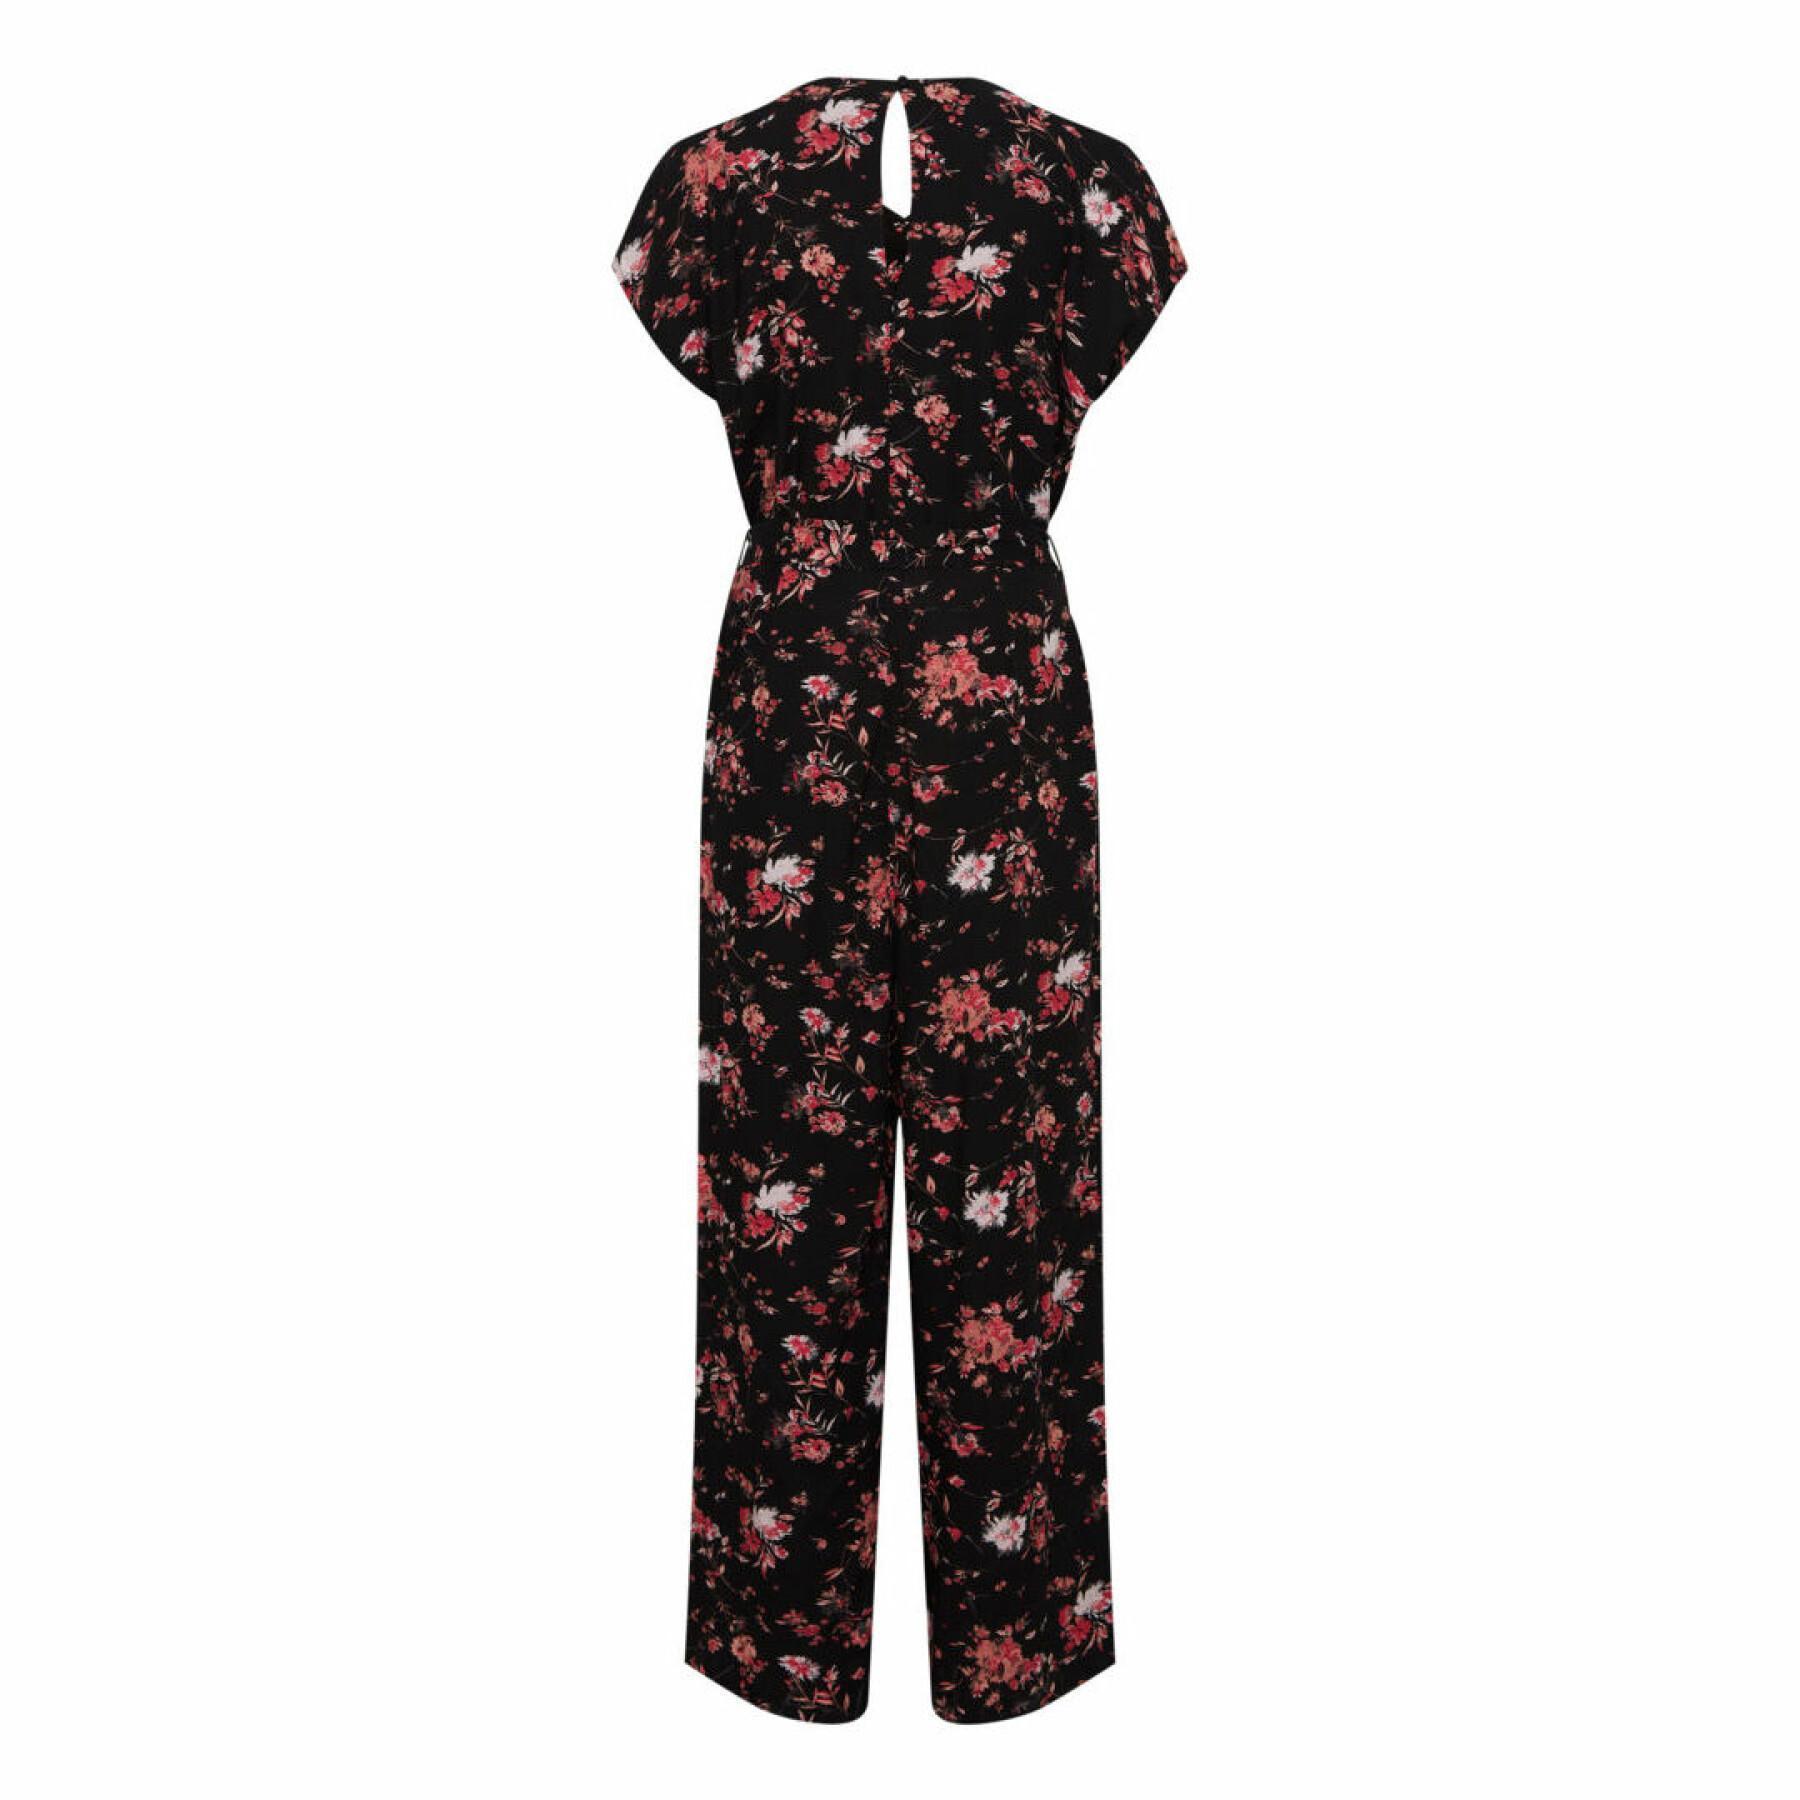 Sleeveless jumpsuit for women b.young Bymmjoella 2